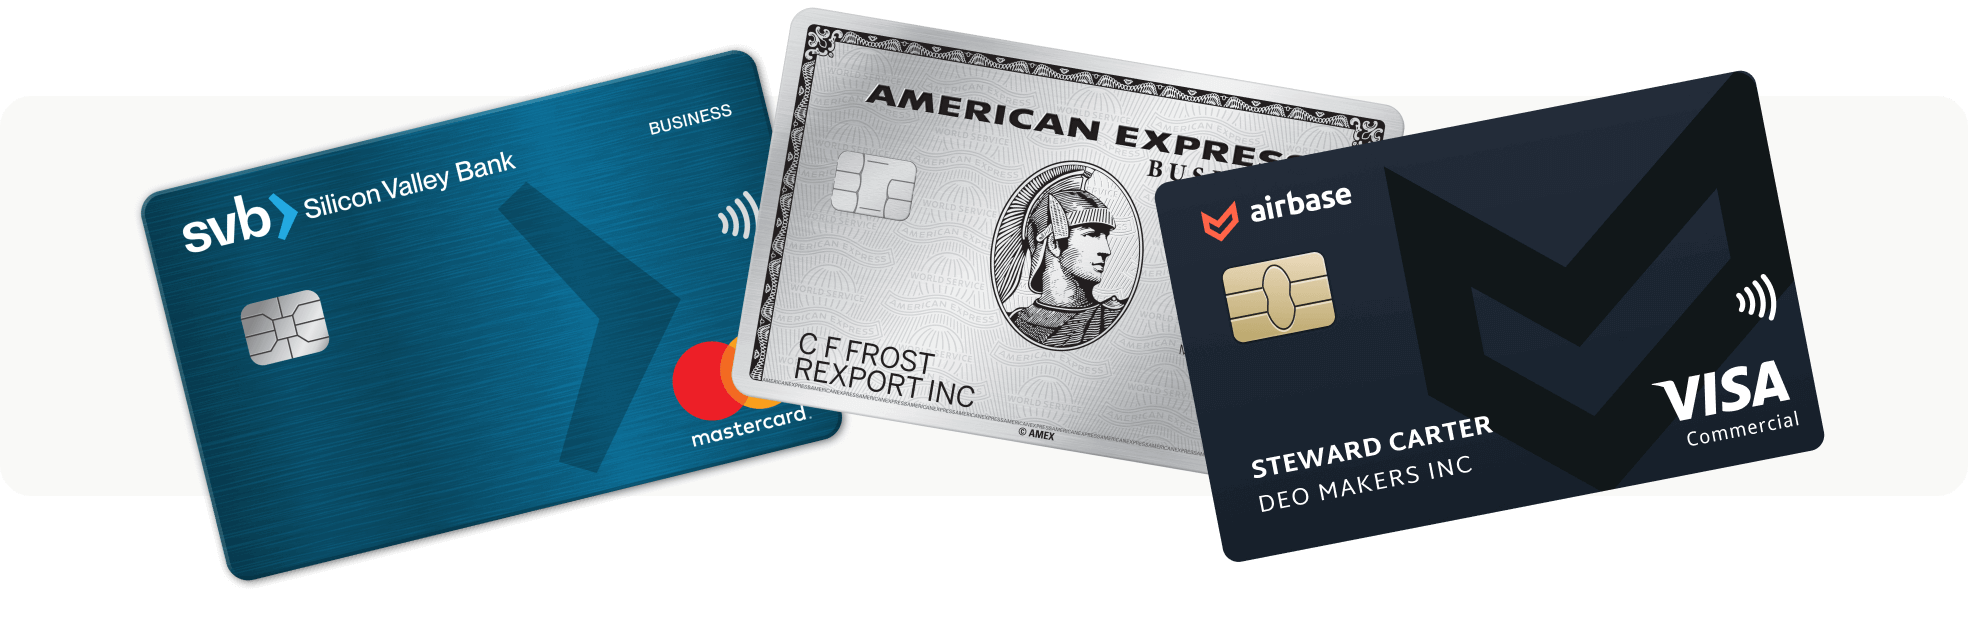 SVB, Amex and Airbase Corporate Cards